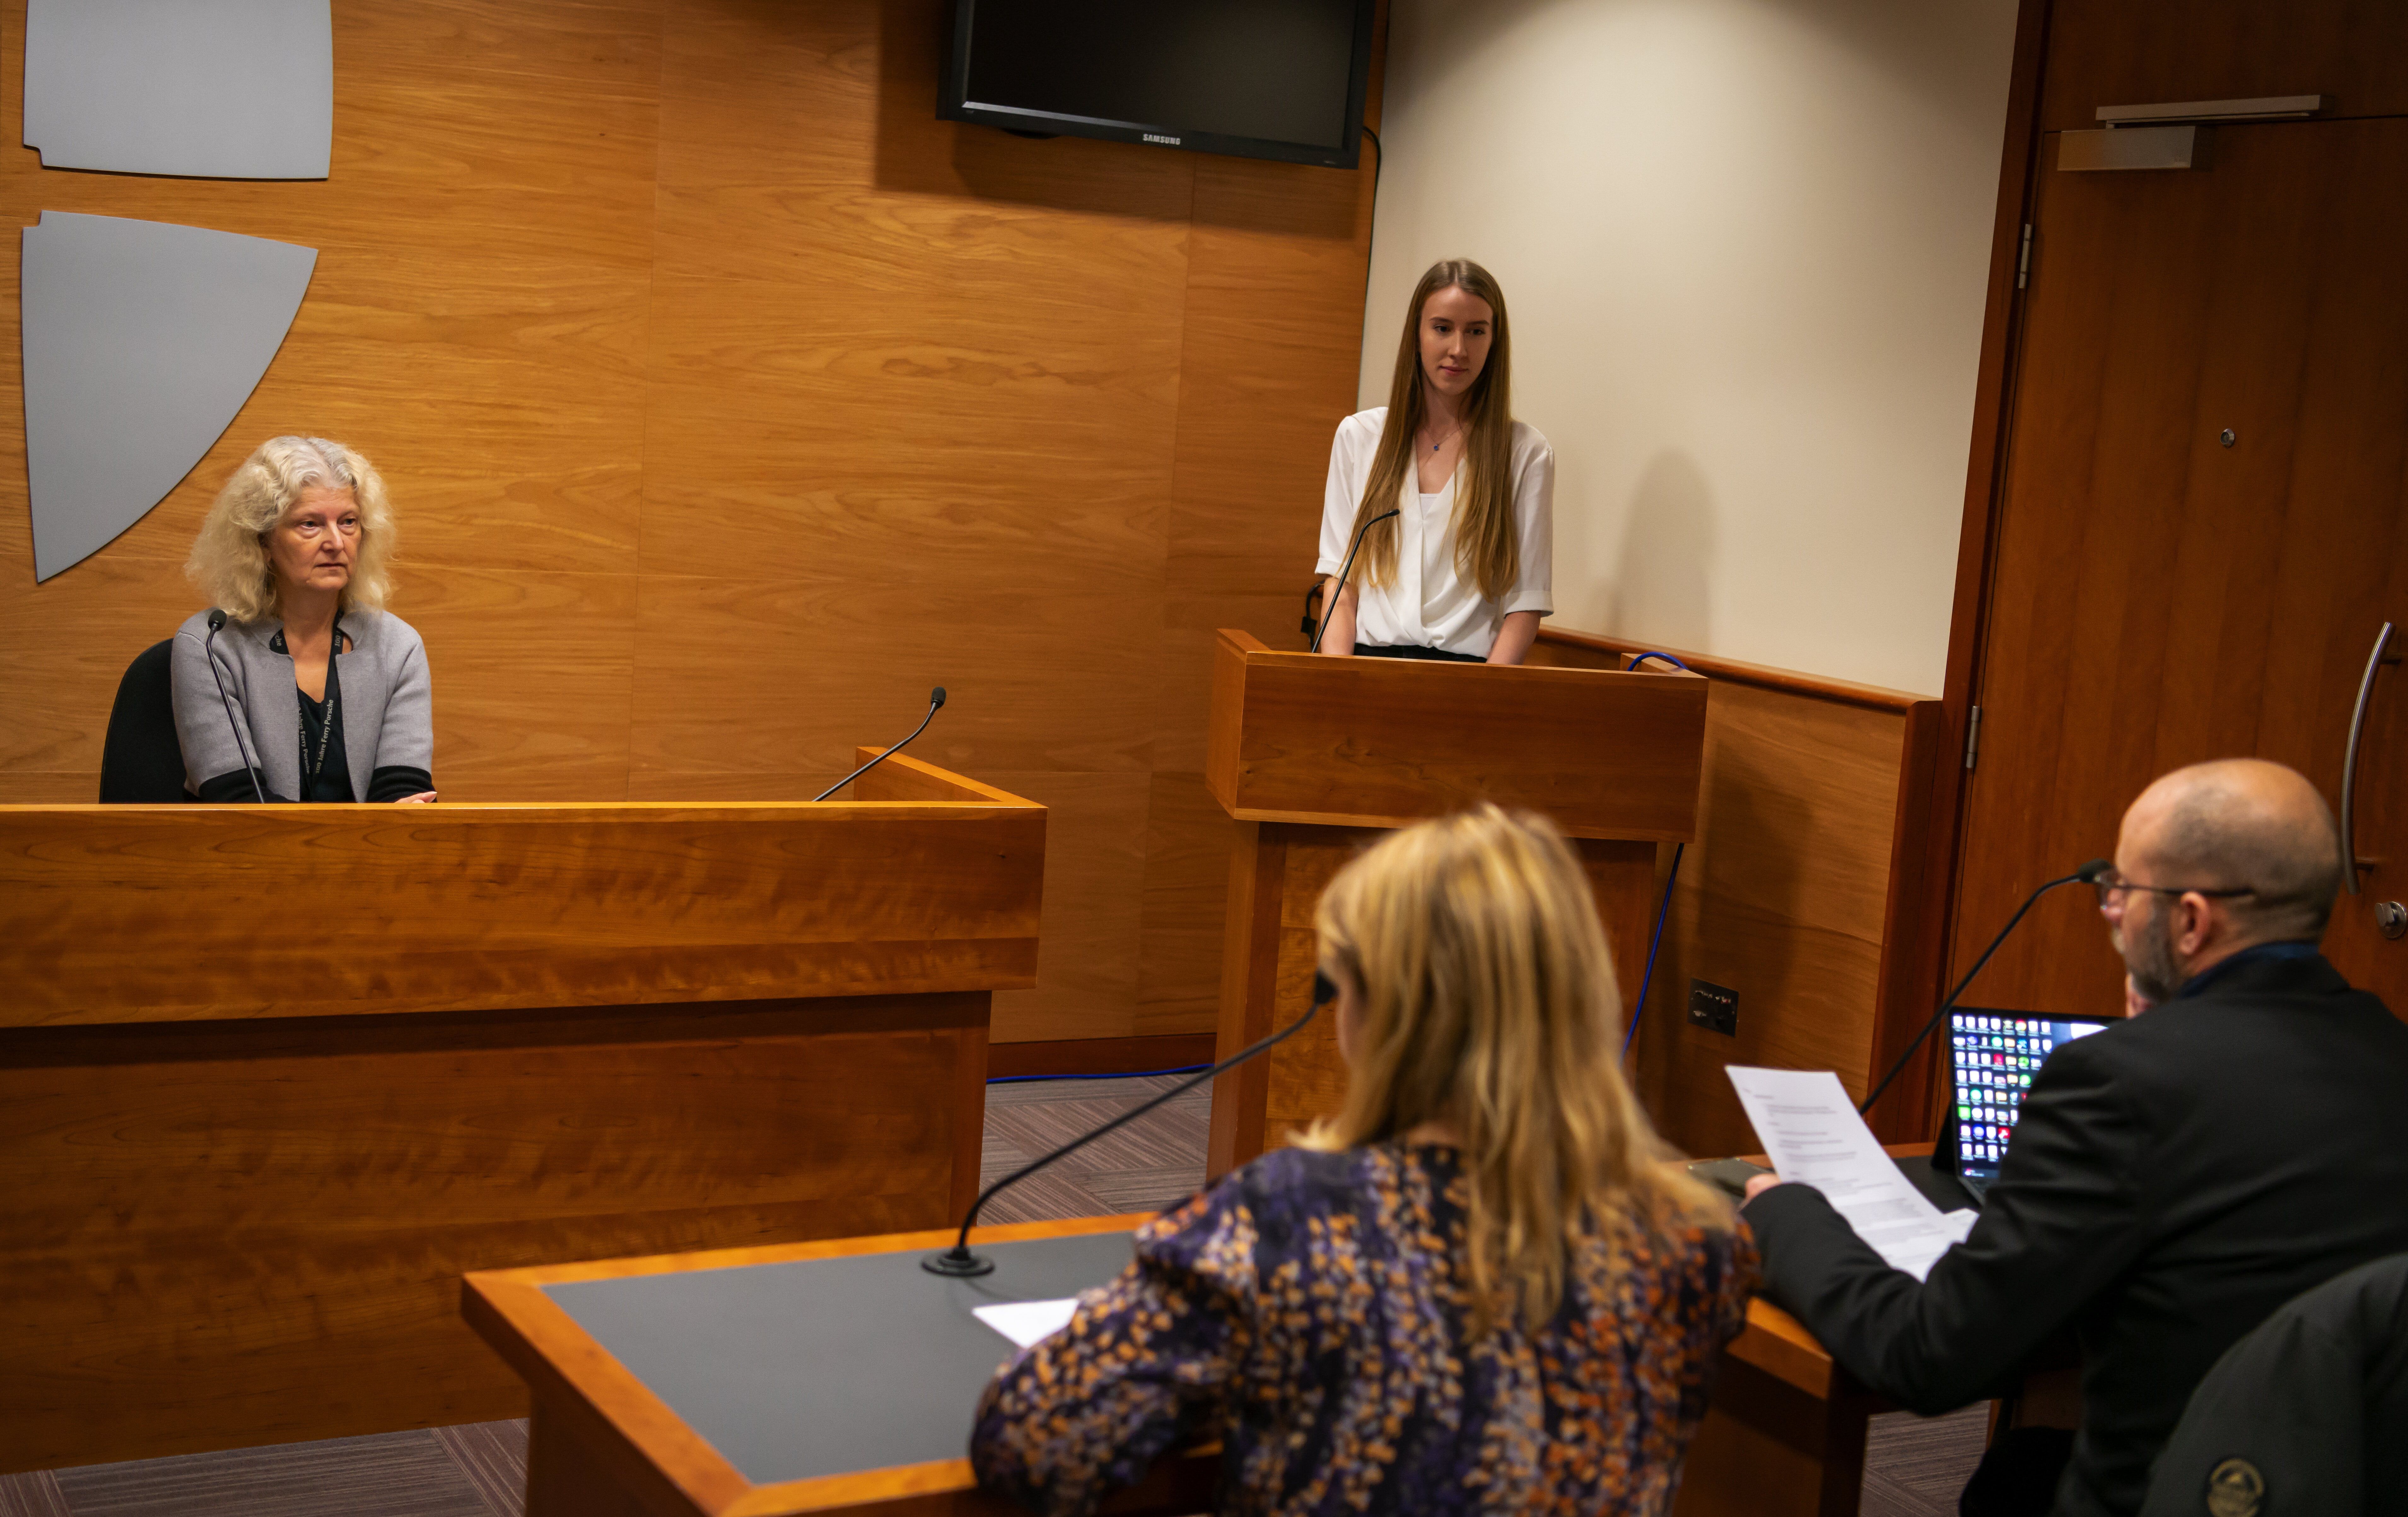 Students taking part in a mock trial as part of the Forensic Arch&Anth course